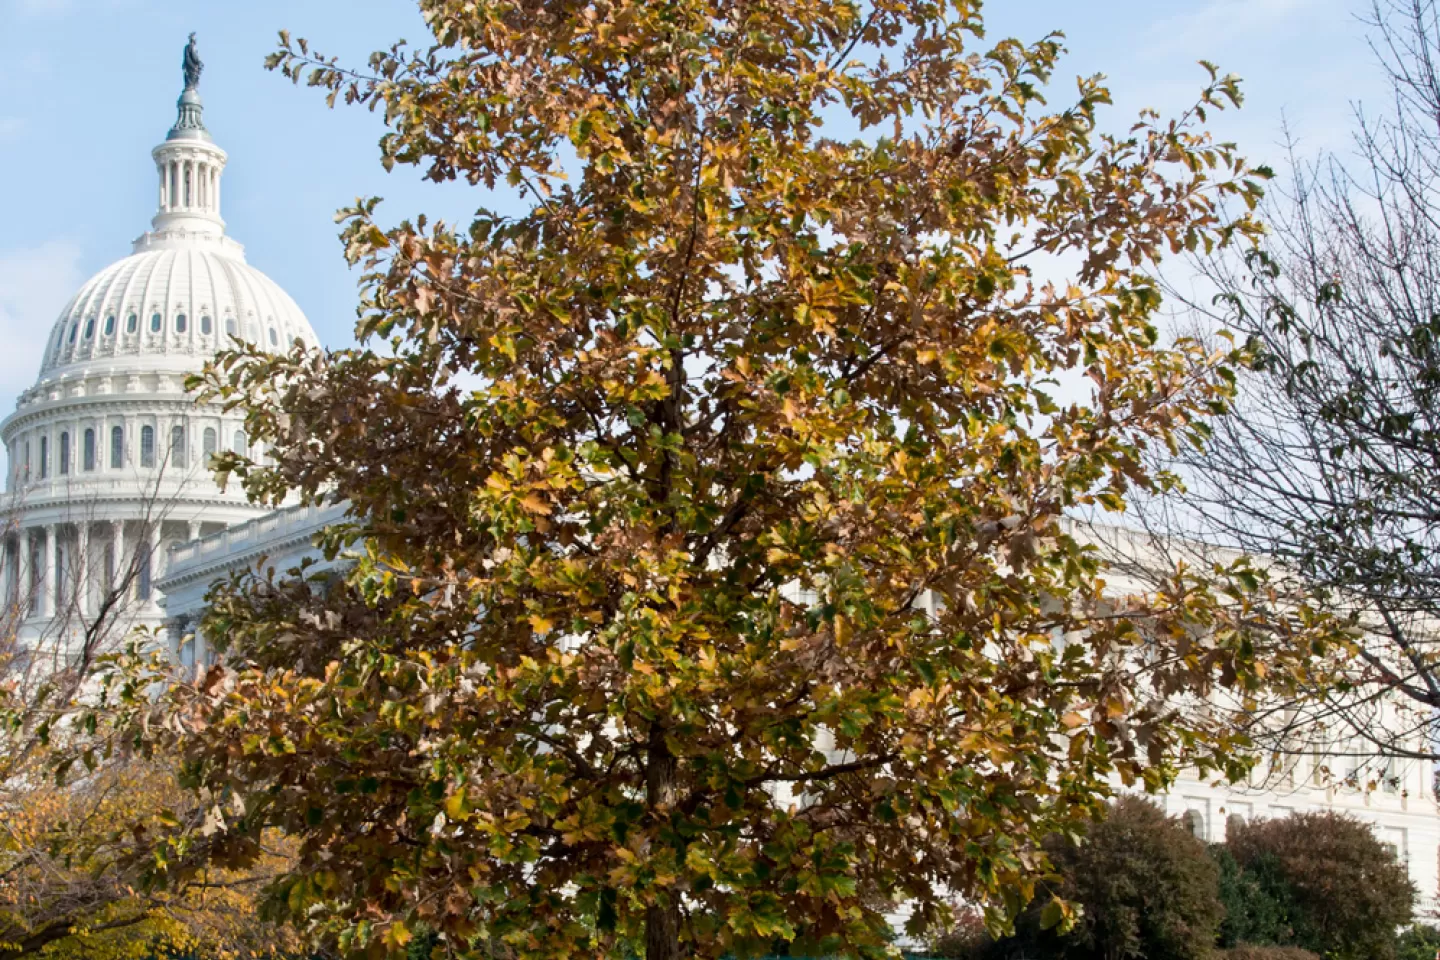 The September 11 Anniversary Tree in fall.